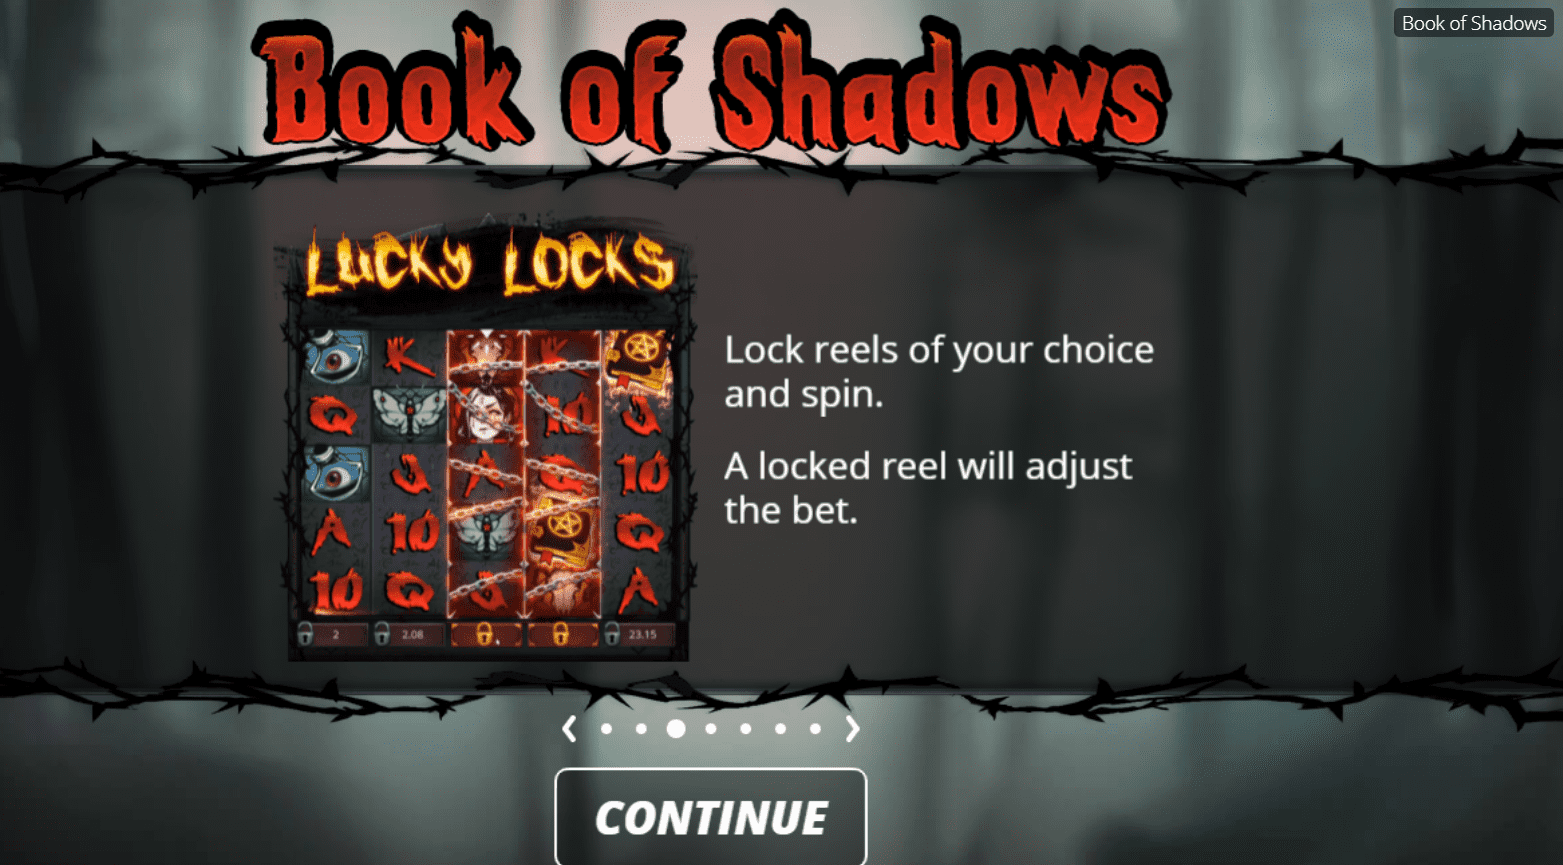 Book of Shadows slot from Nolimit City